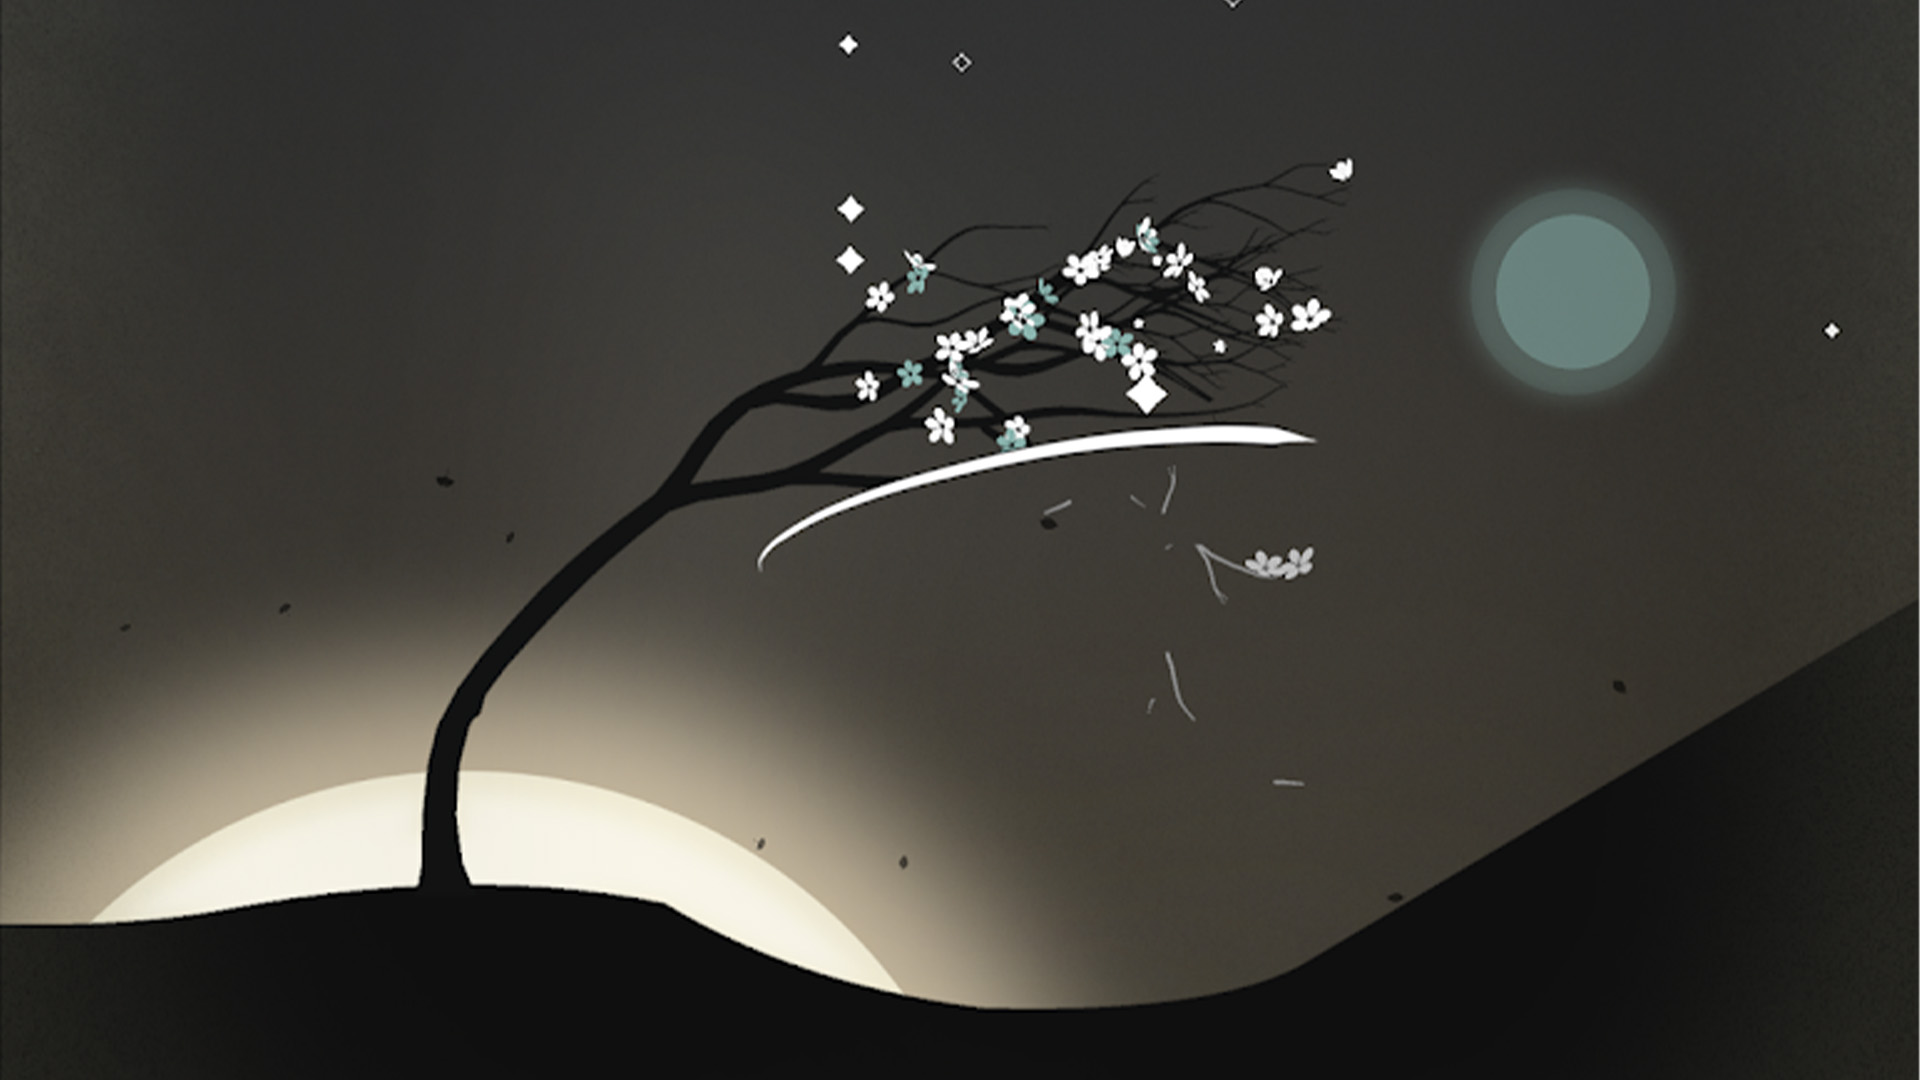 Prune most relaxing games for Android